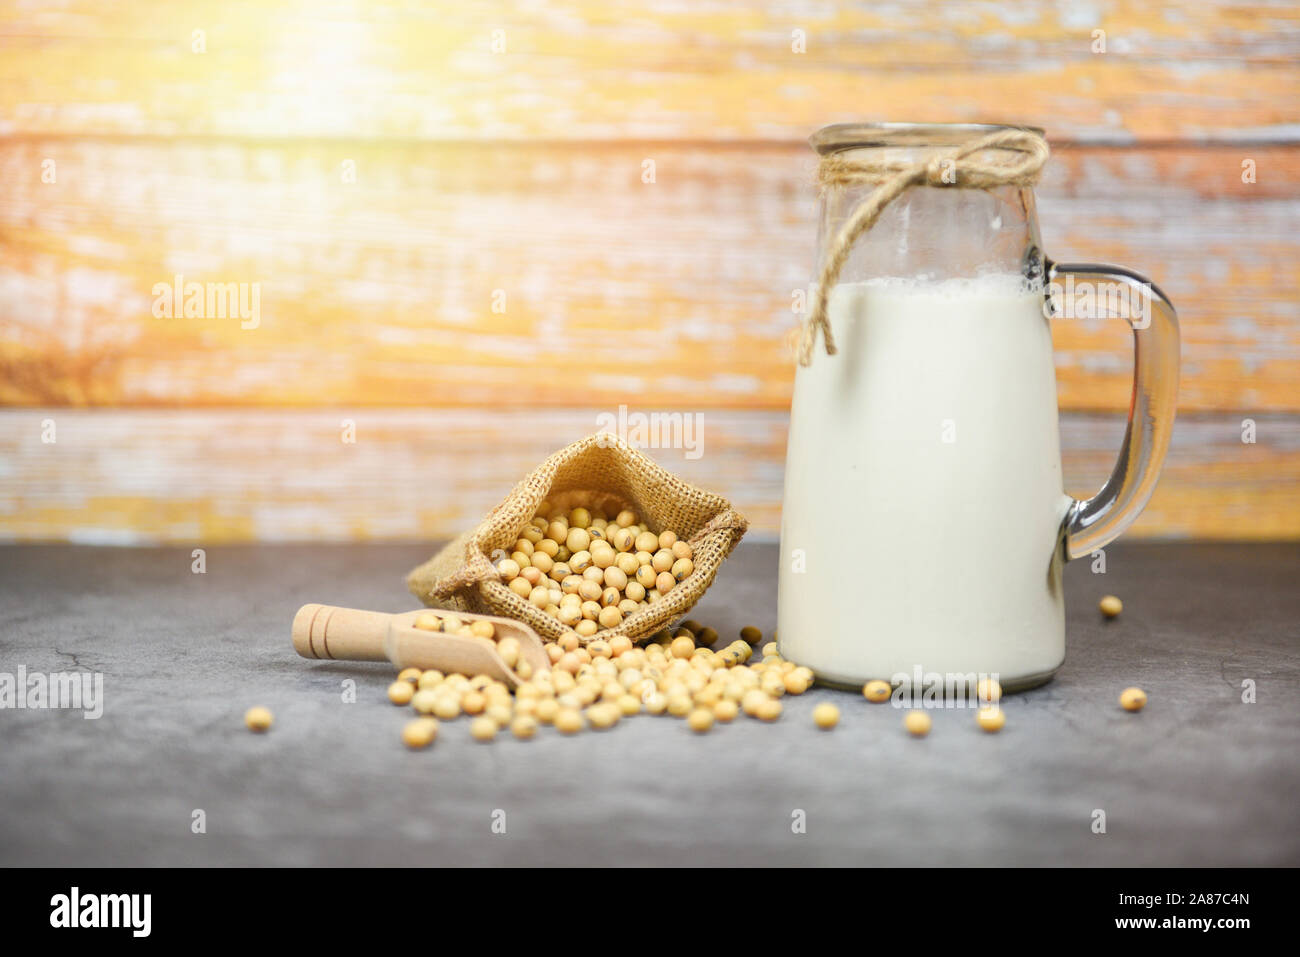 Soybean and dried soy beans on white bowl / Soy milk in glass jar for healthy diet drink and natural bean protein Stock Photo